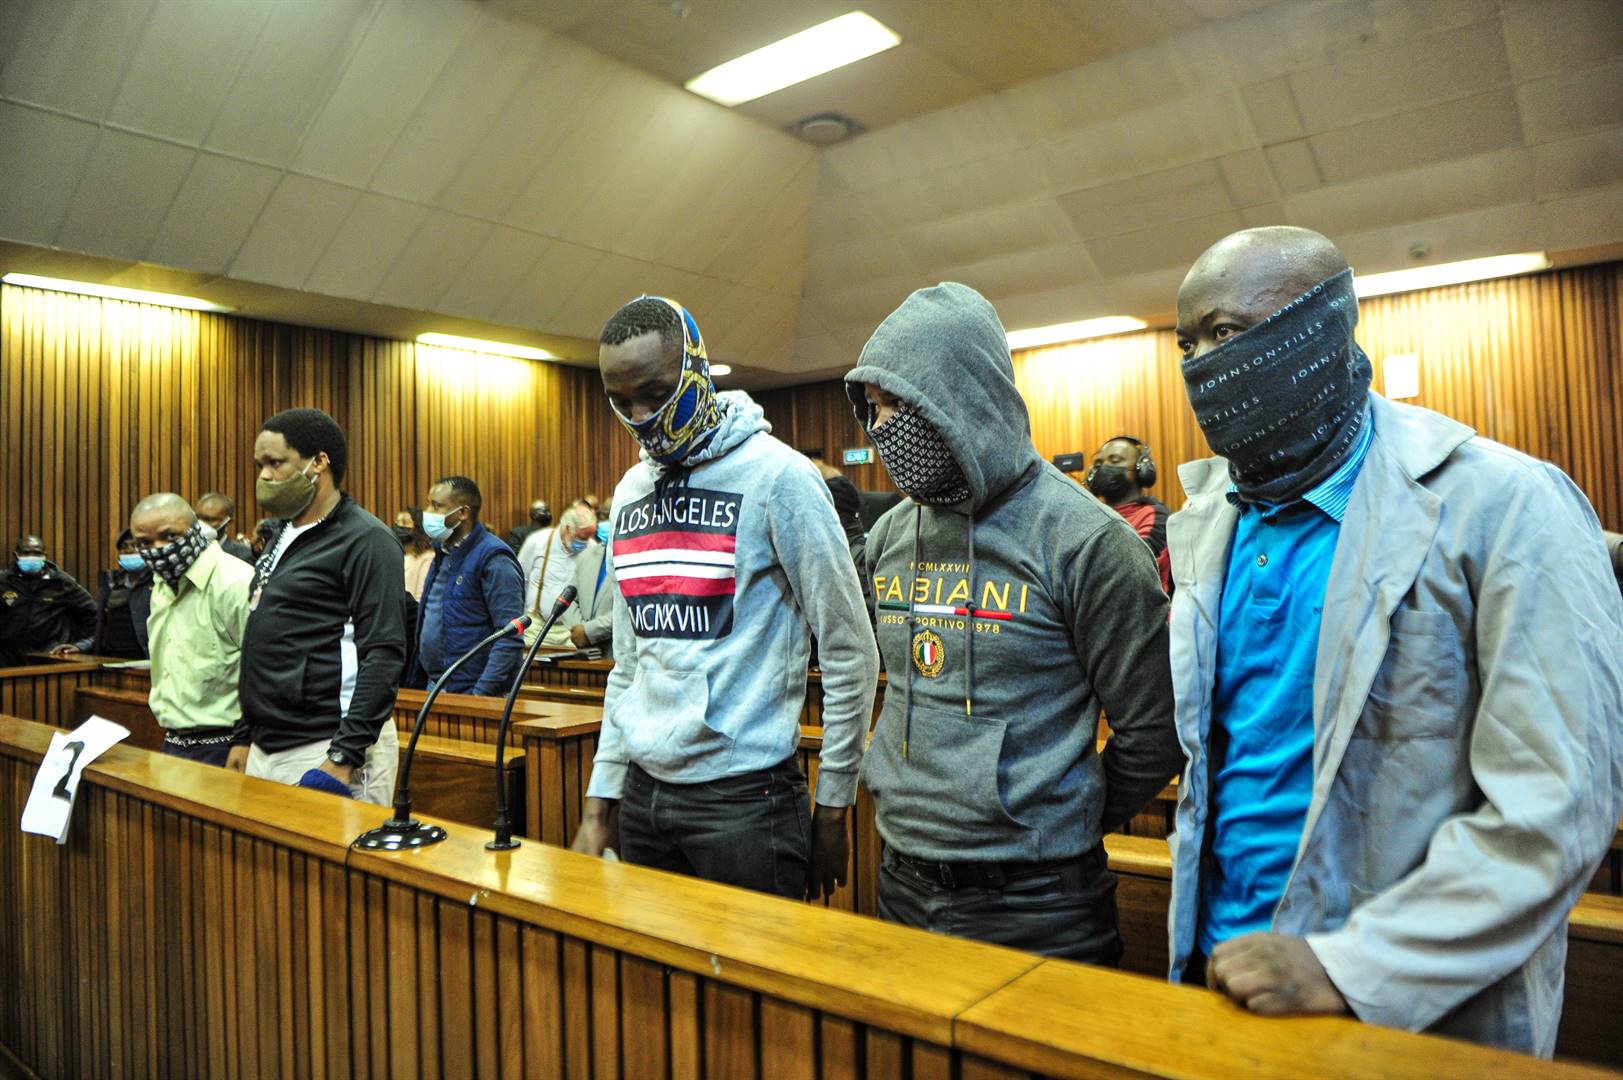 The five men accused of killing football star Senzo Meyiwa in the dock the Pretoria High Court on Monday. The trial against the five men has been postponed to April 12. Meyiwa was shot dead eight years ago in Vosloorus. Photo: Rosetta Msimango